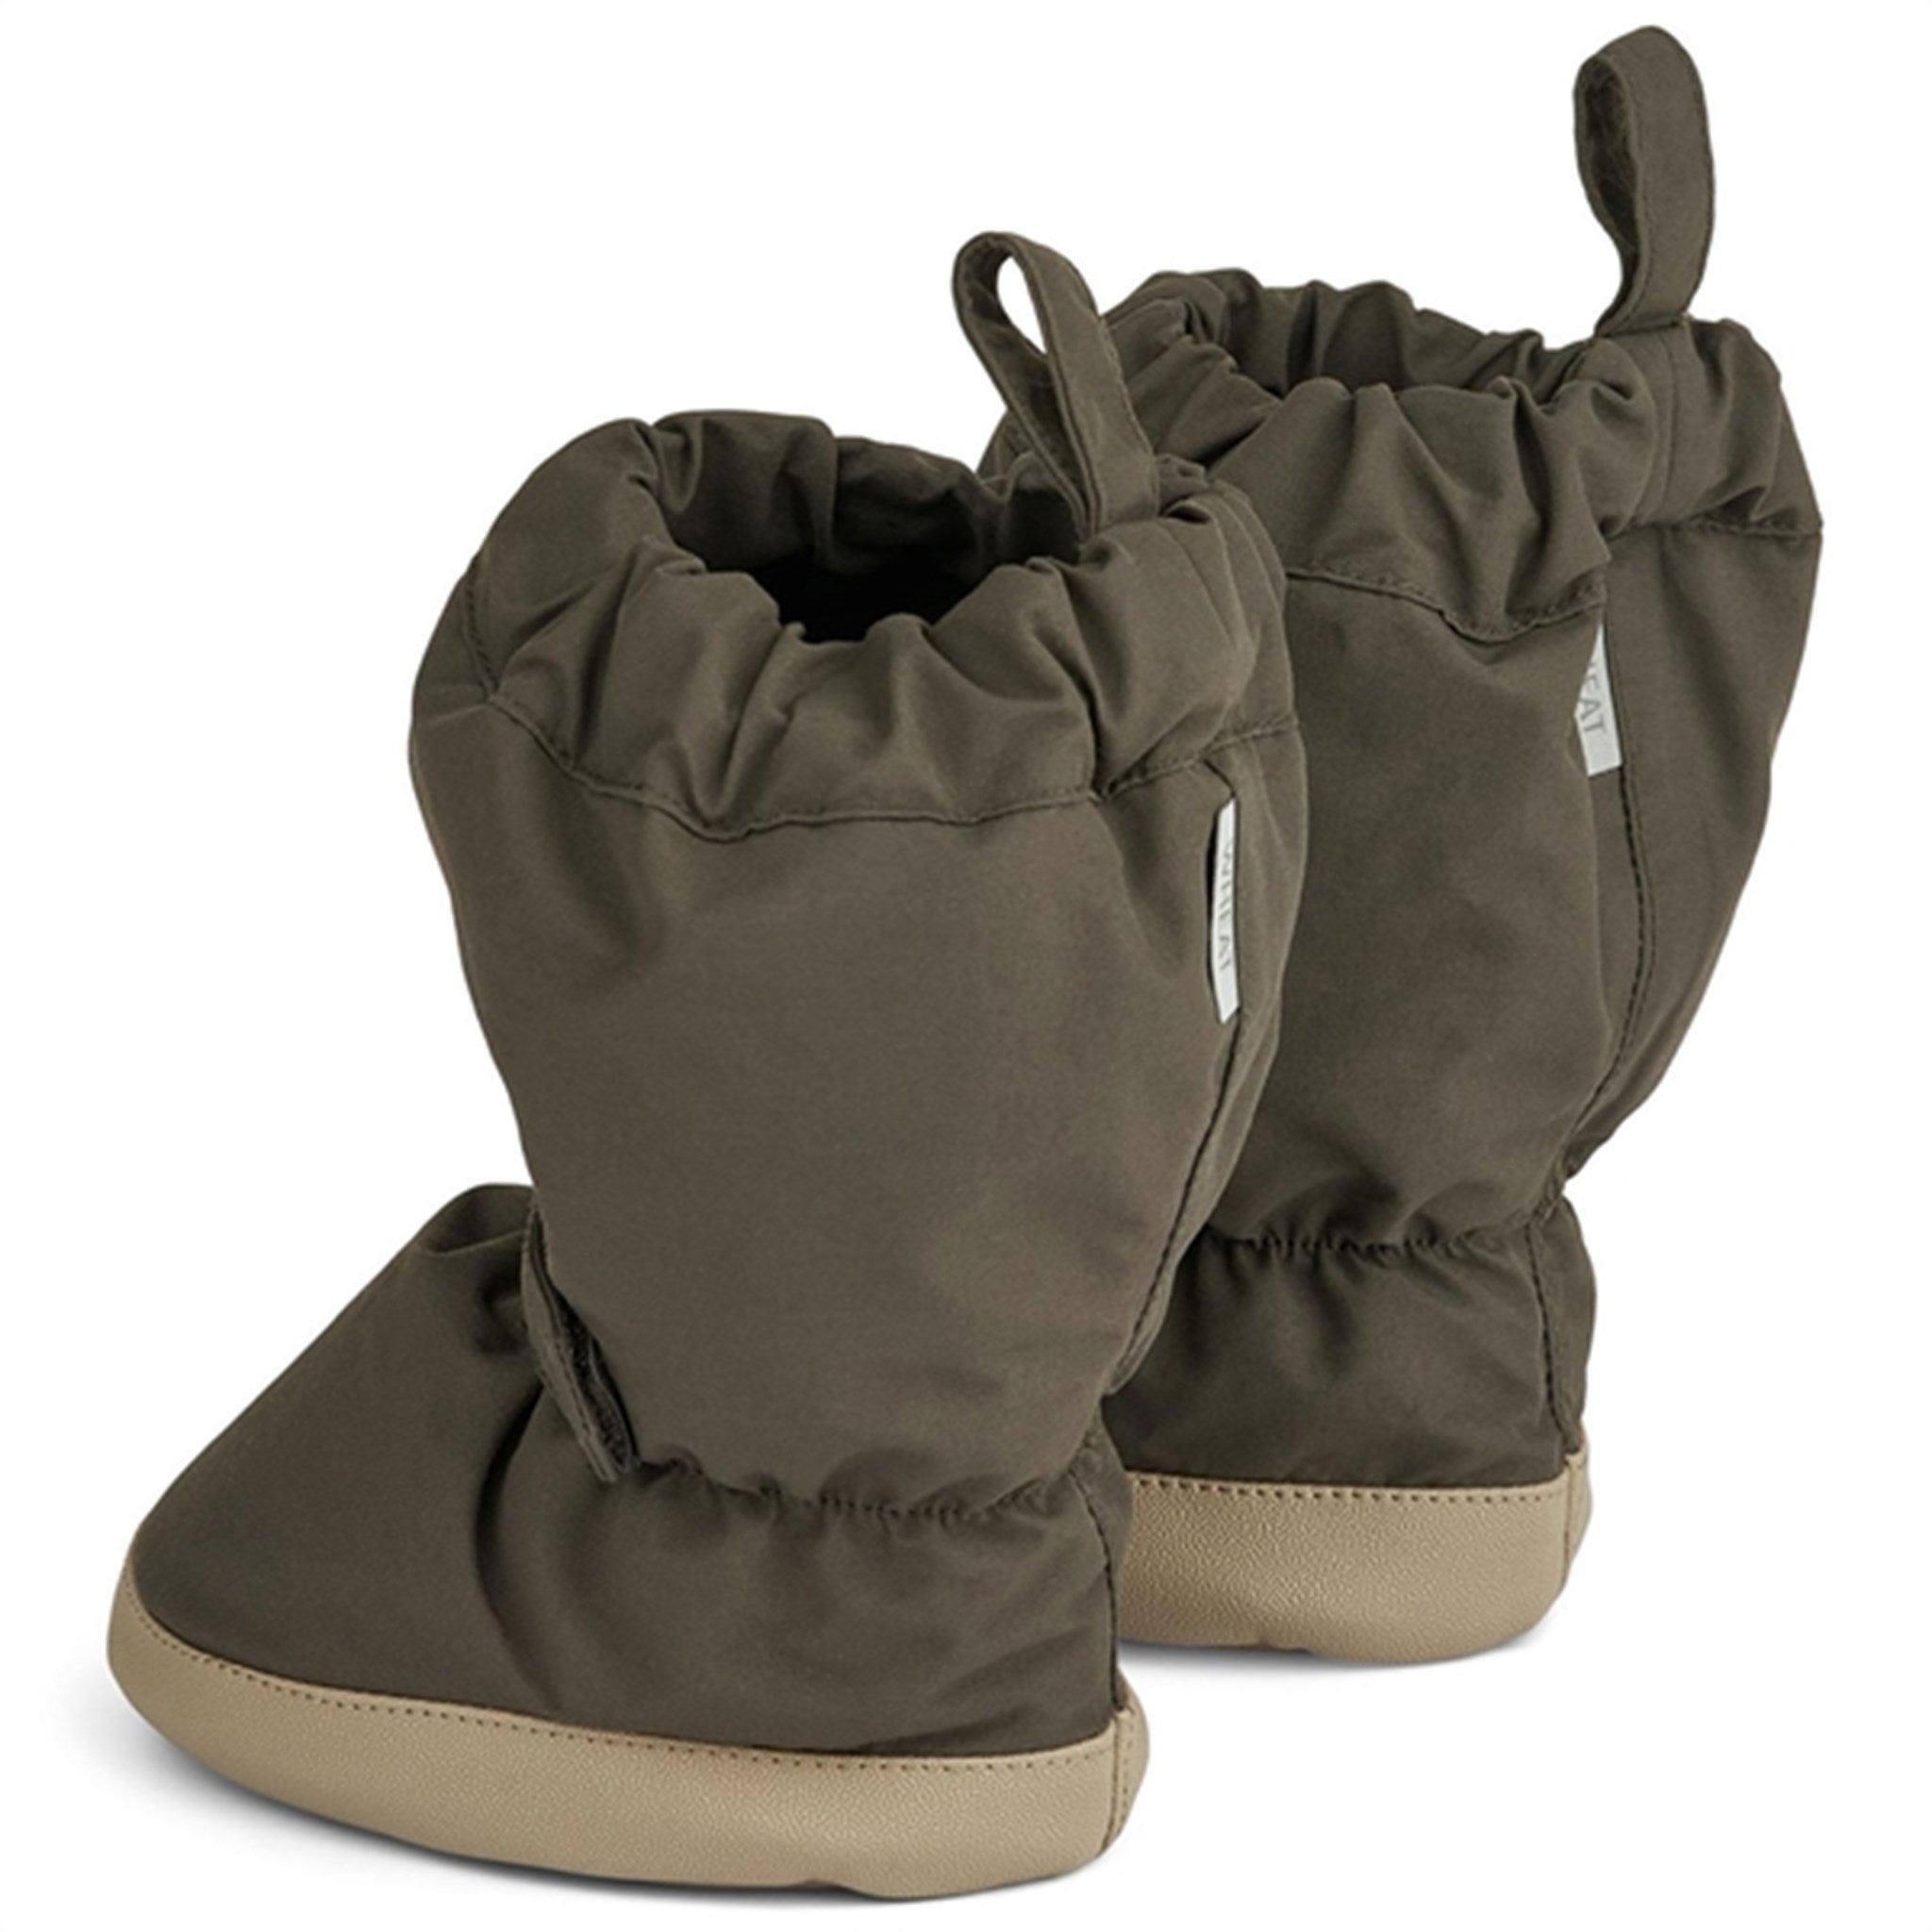 Wheat Outerwear Booties Tech Dry Black 2